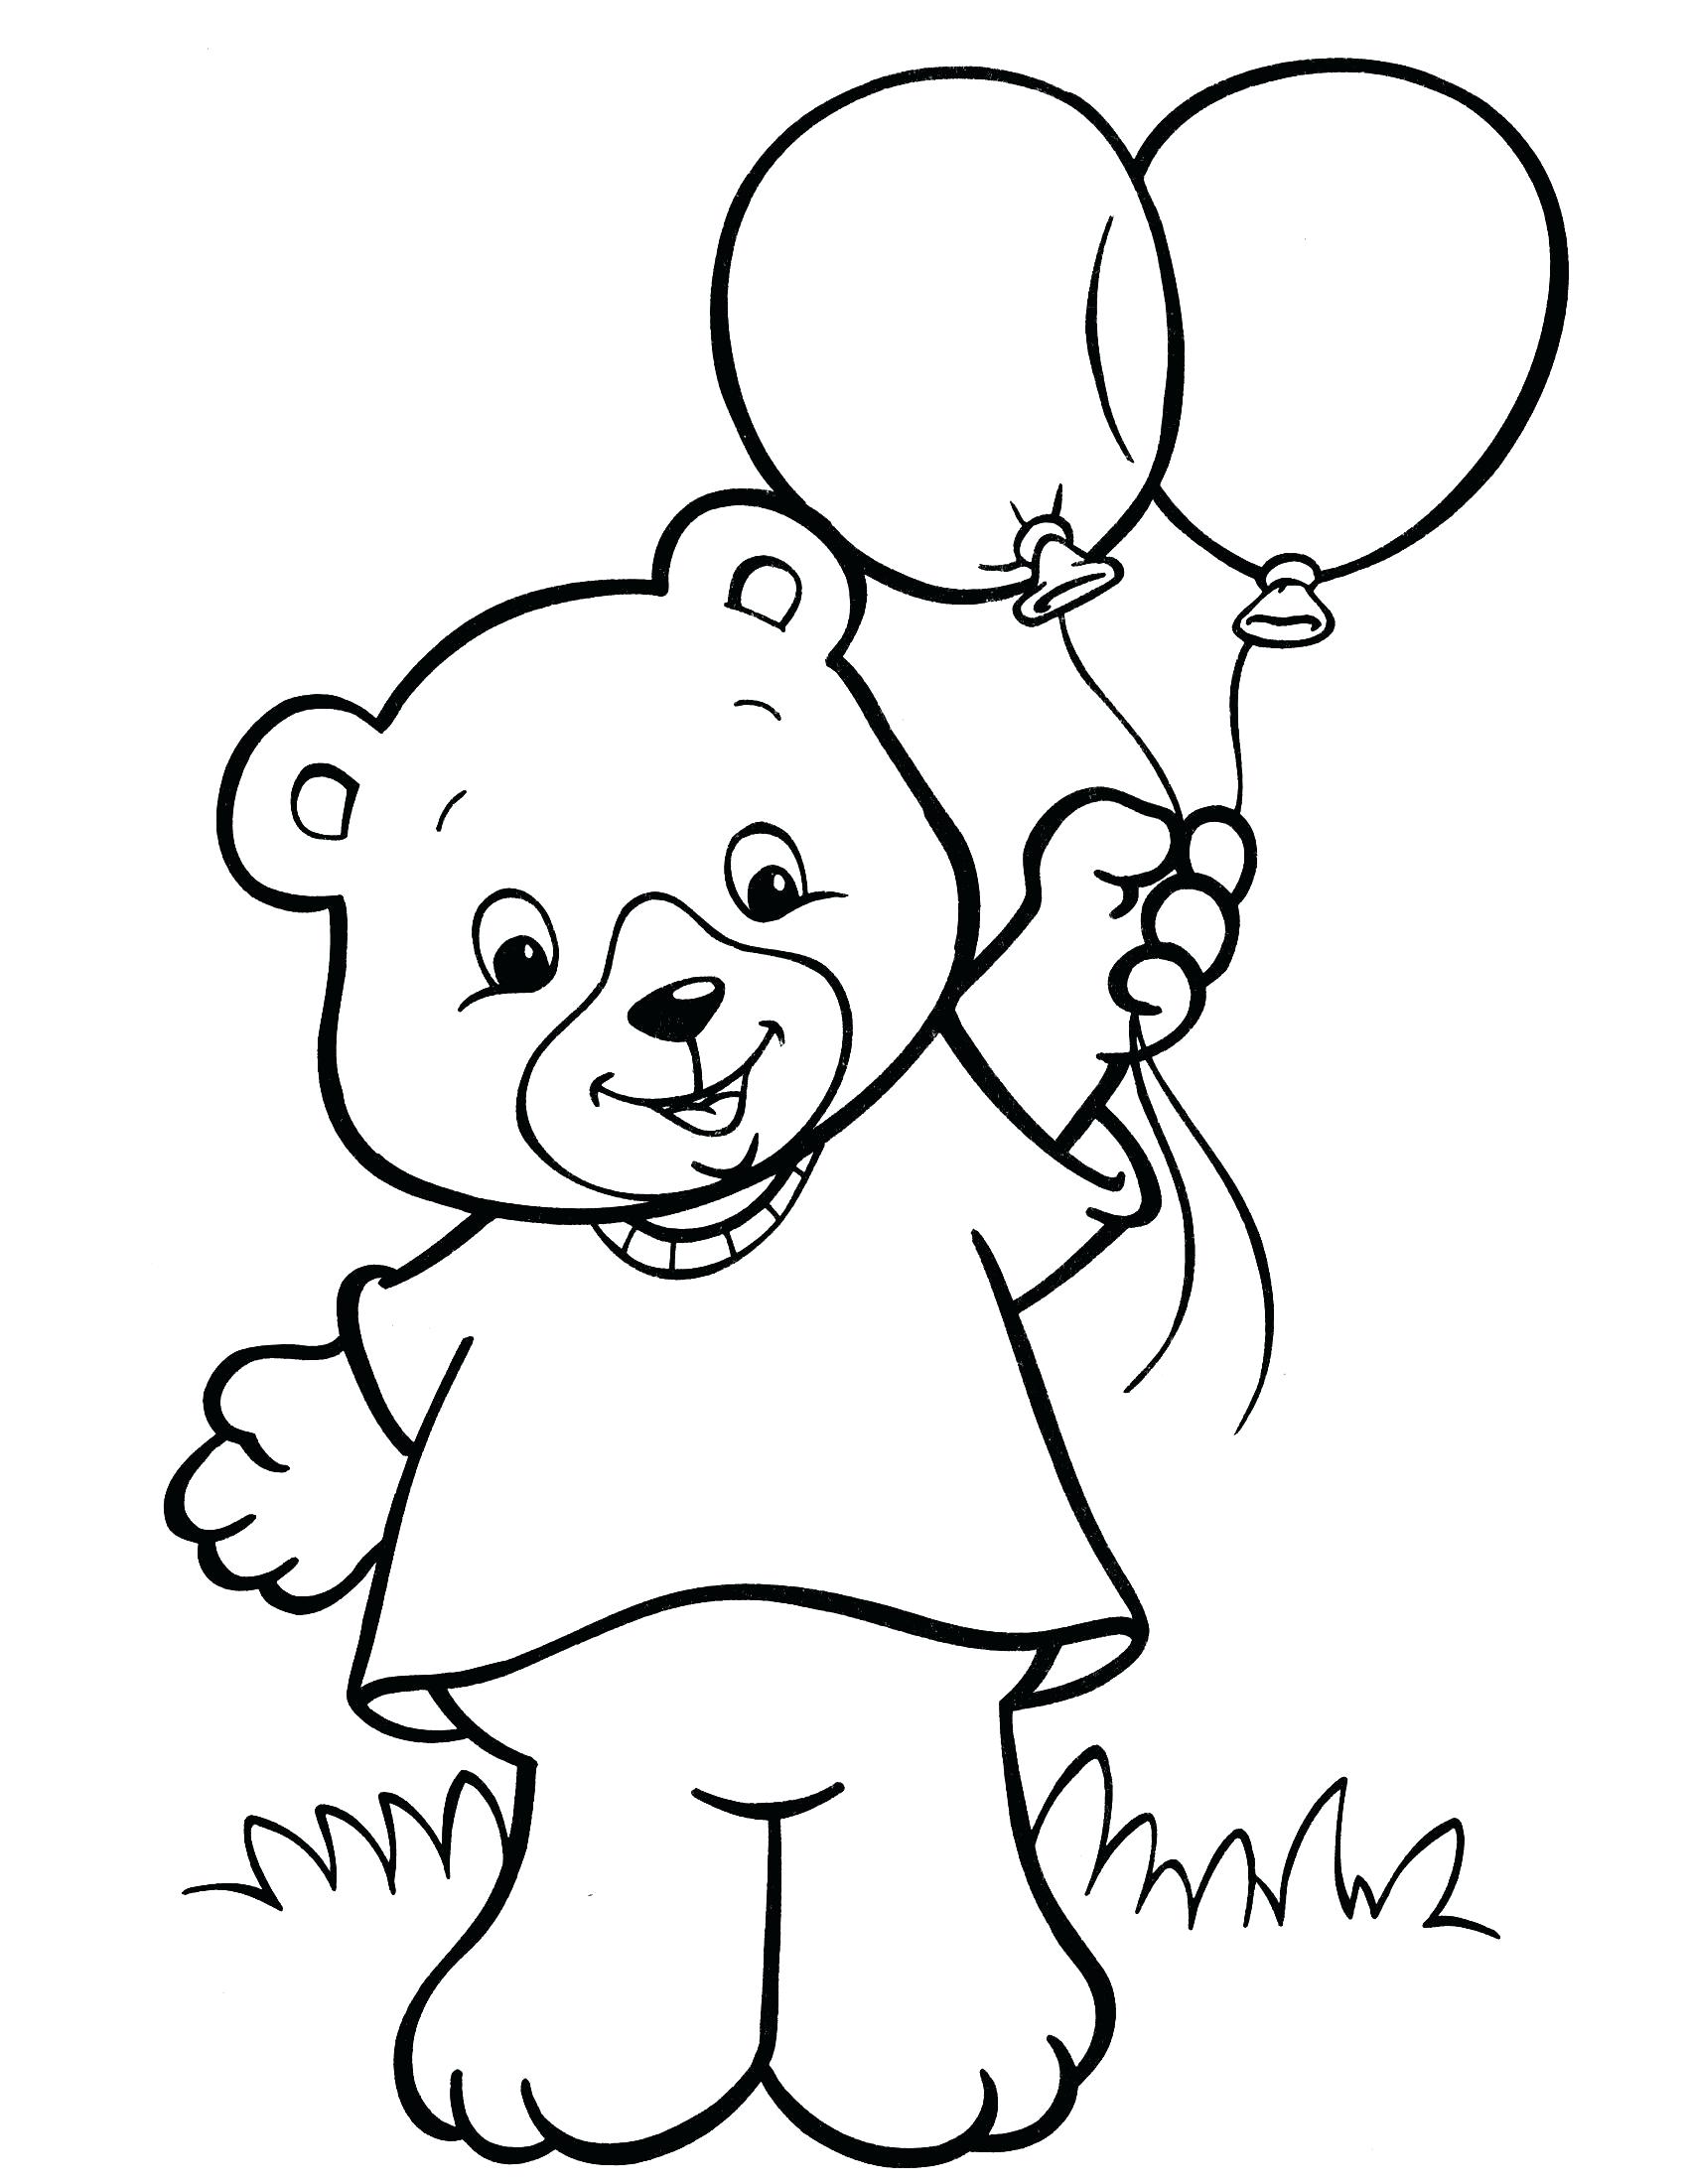 Free Printable Coloring Pages For 4 Year Olds